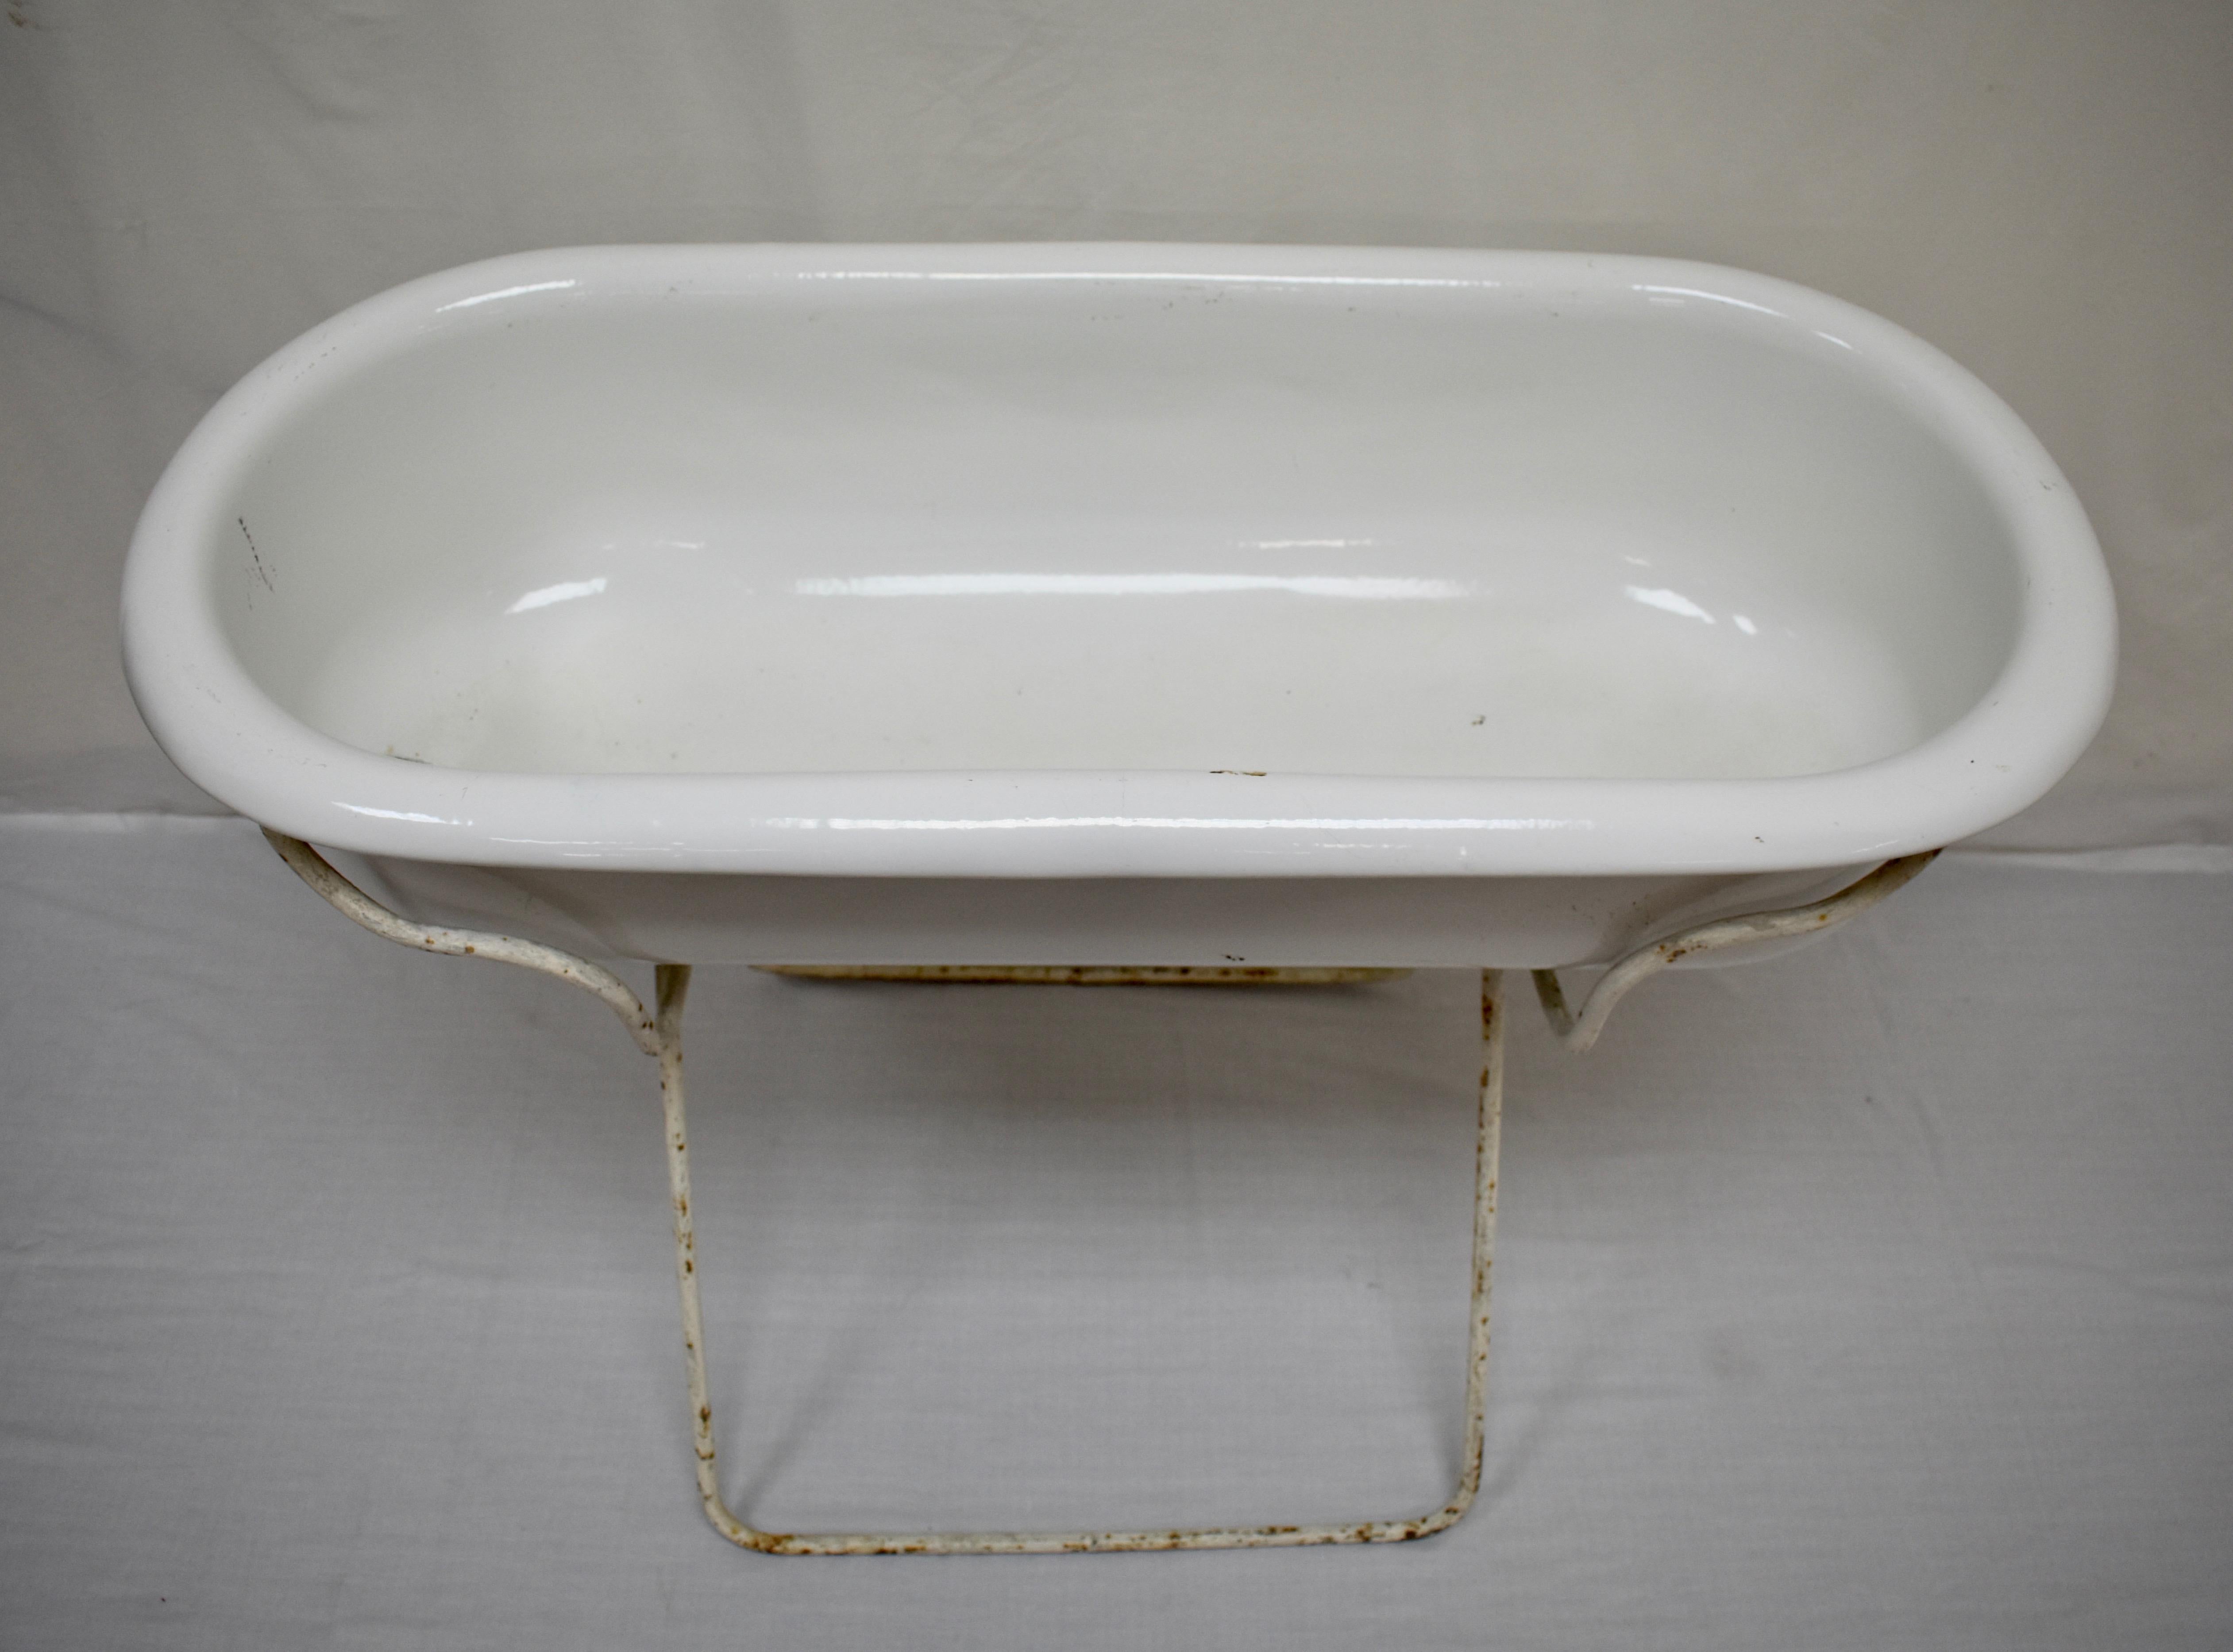 Hungarian Vintage Porcelain Enamel Baby Bath with Stand